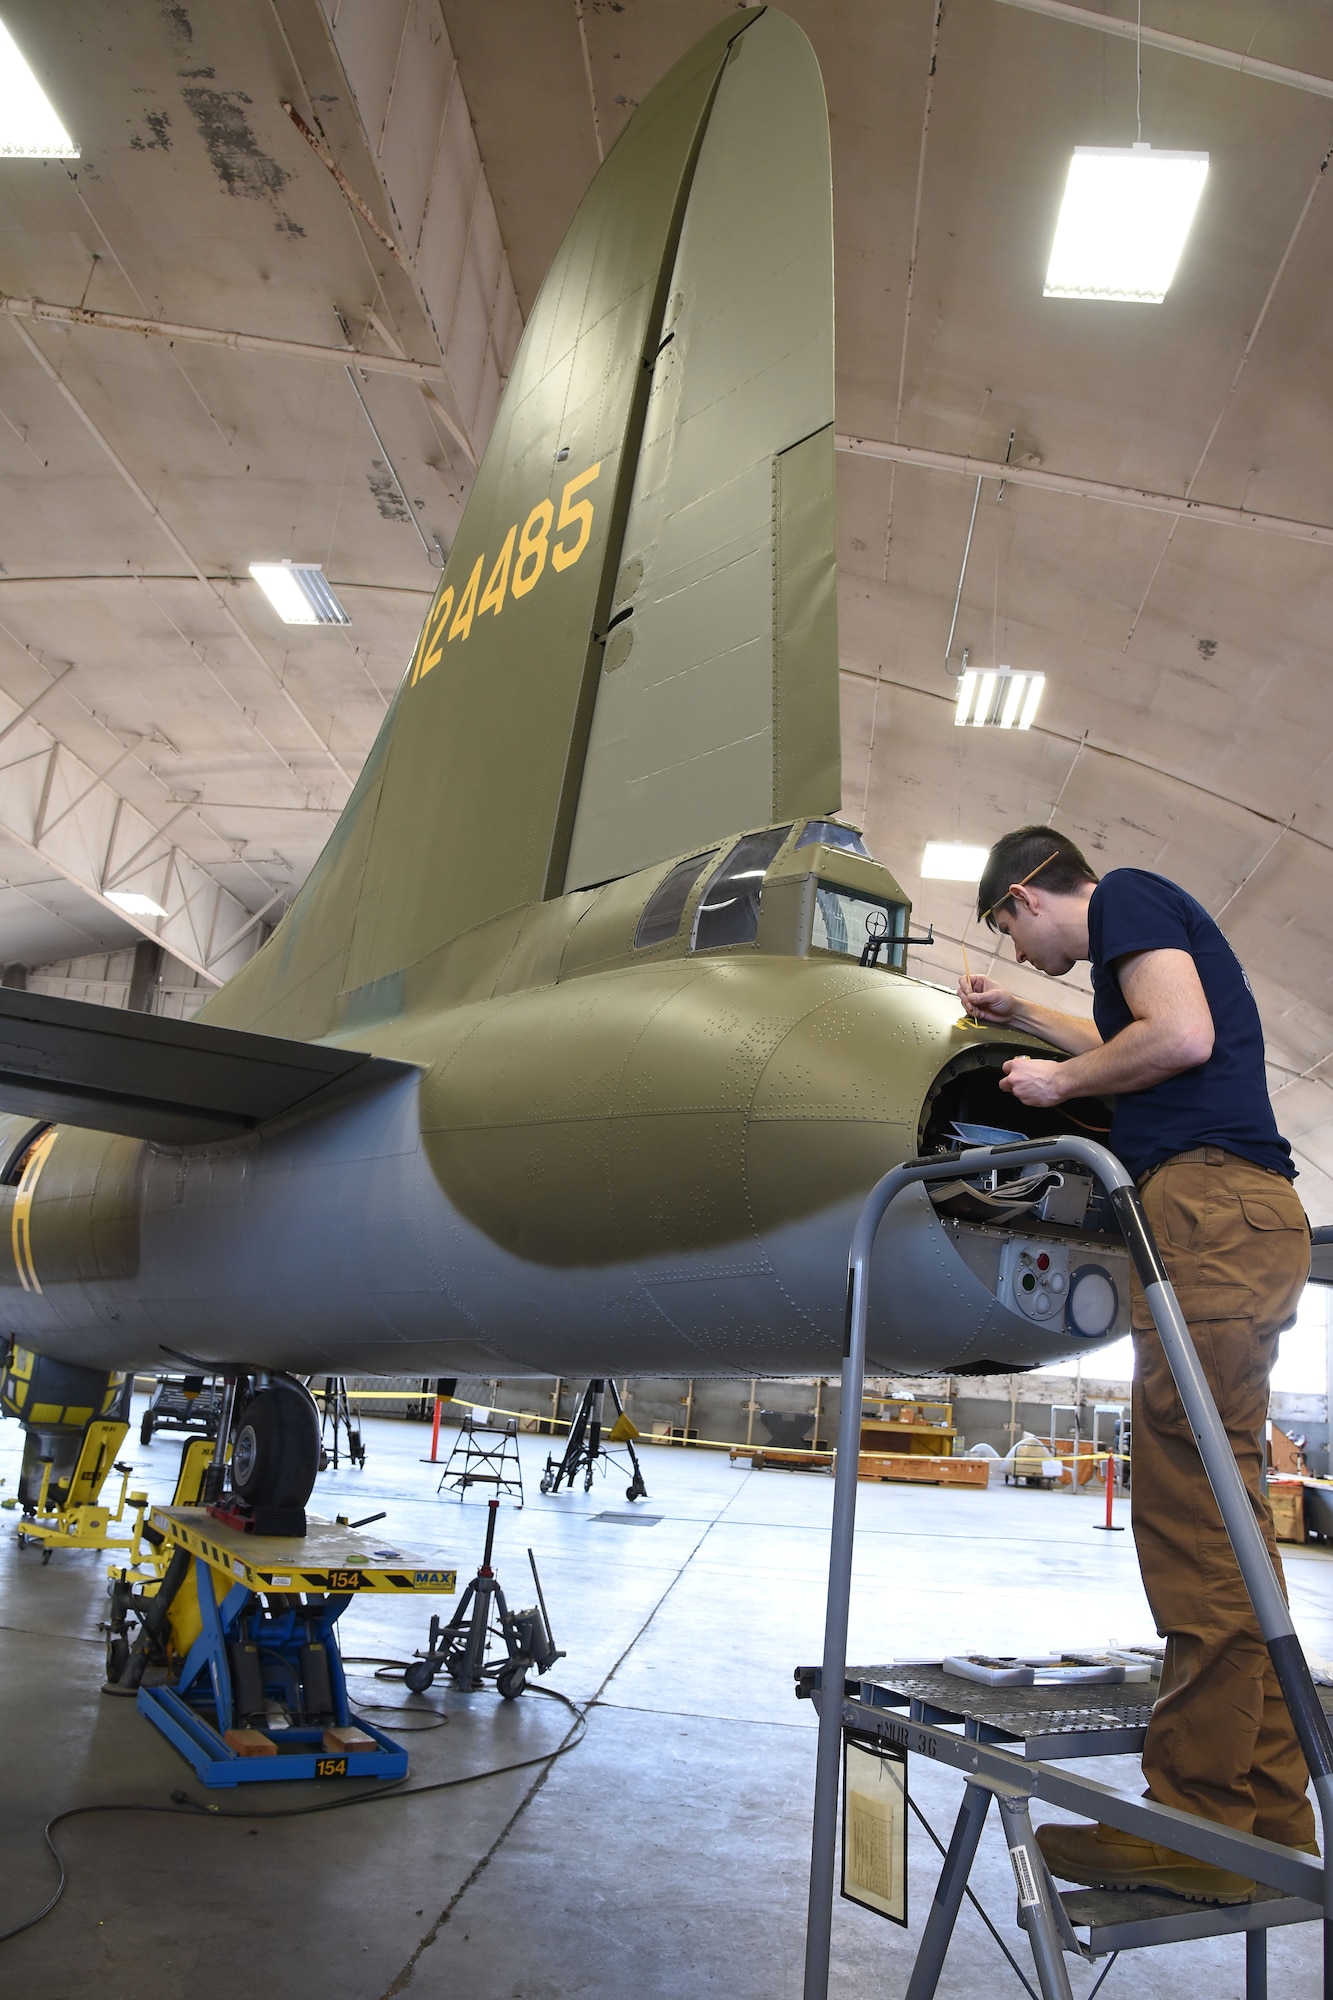 (02/01/2018) Museum restoration specialist Casey Simmons paints the names Pete and Repeat on the tail gun position of the Boeing B-17F Memphis Belle during the restoration process. SSgt. John Quinlan, the tail gunner of the Memphis Belle crew, named the guns Pete and Repeat during WWII. Quinlan also received credit for shooting down one German fighter which is represented by the swastika. (U.S. Air Force photo by Ken LaRock)